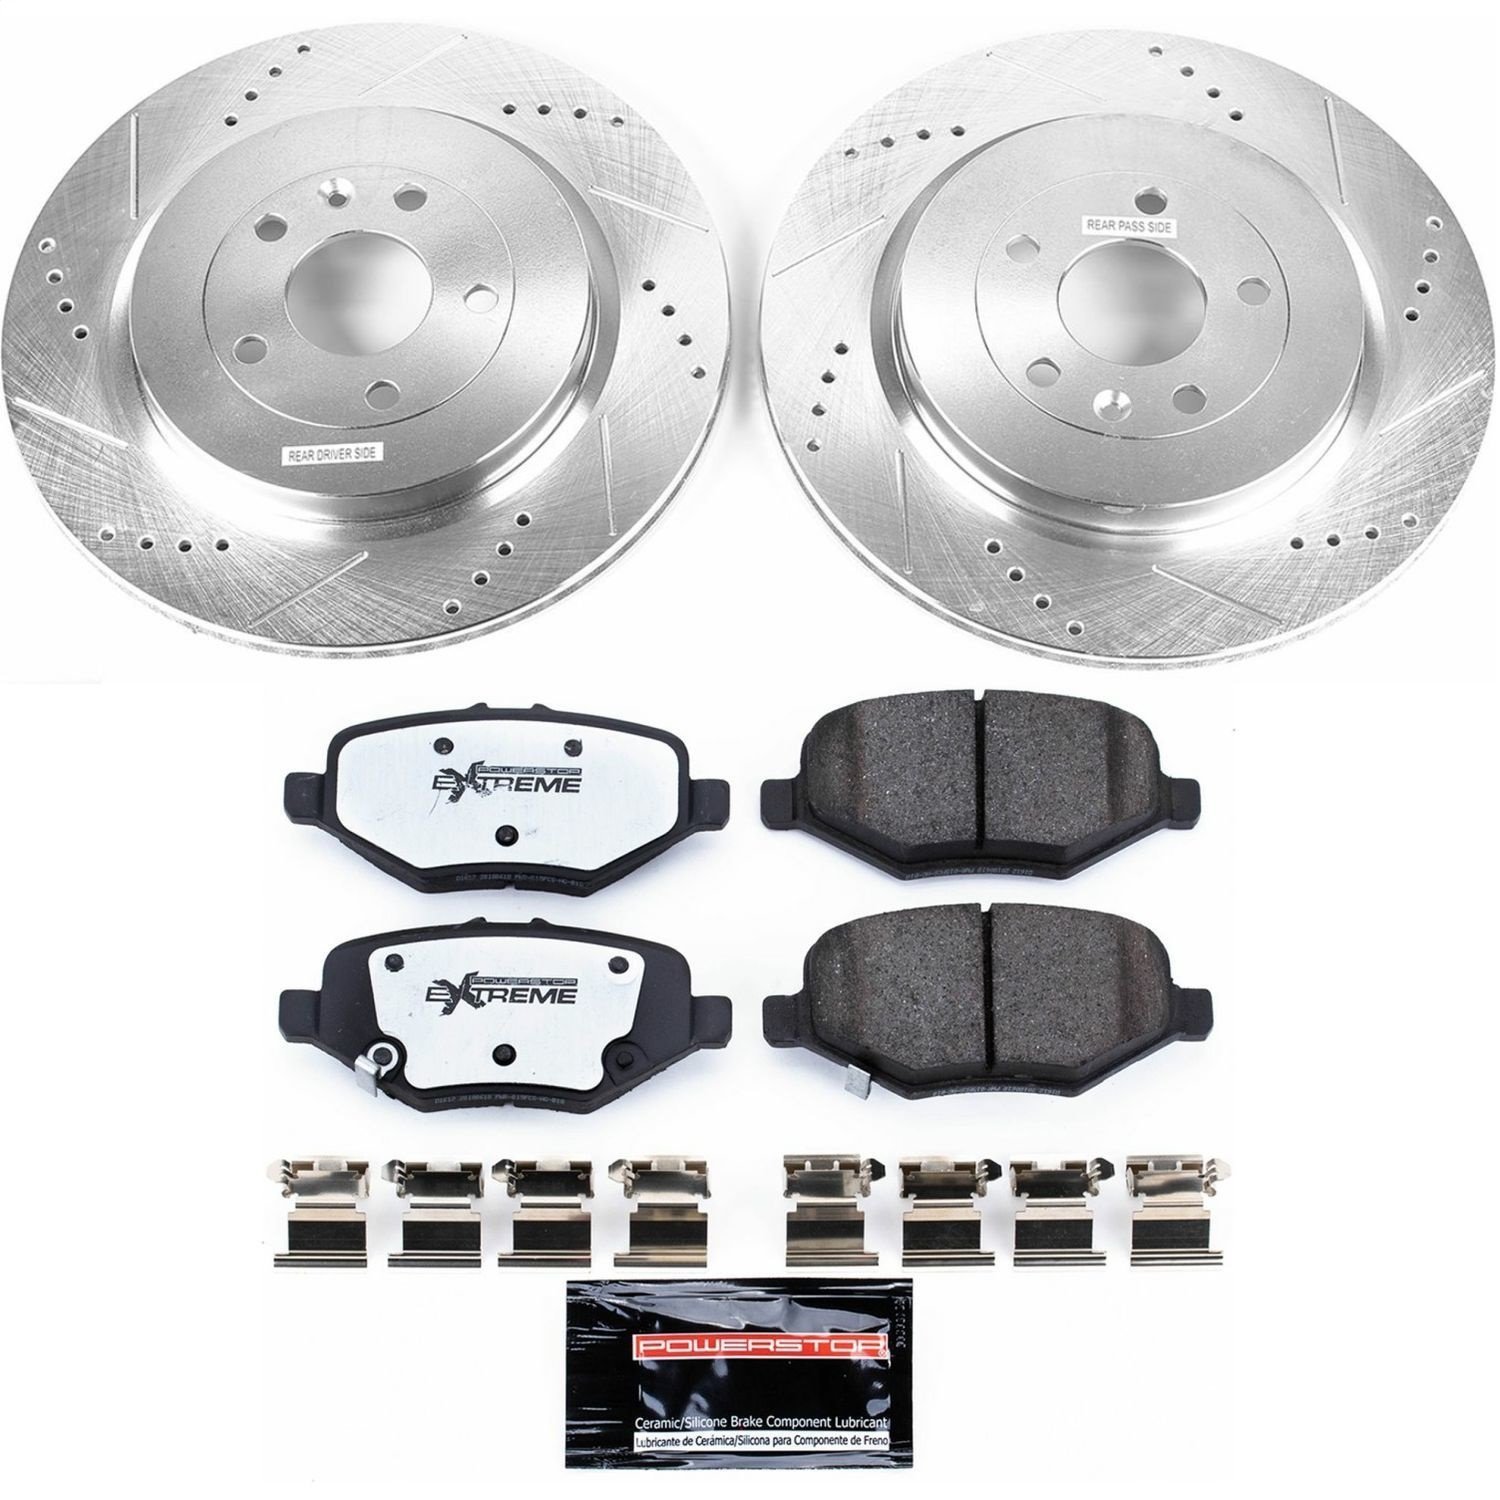 Z36 Truck and Tow Brake Pad and Rotor Kit Fits Select Late Model Ford, Lincoln Models [Rear]